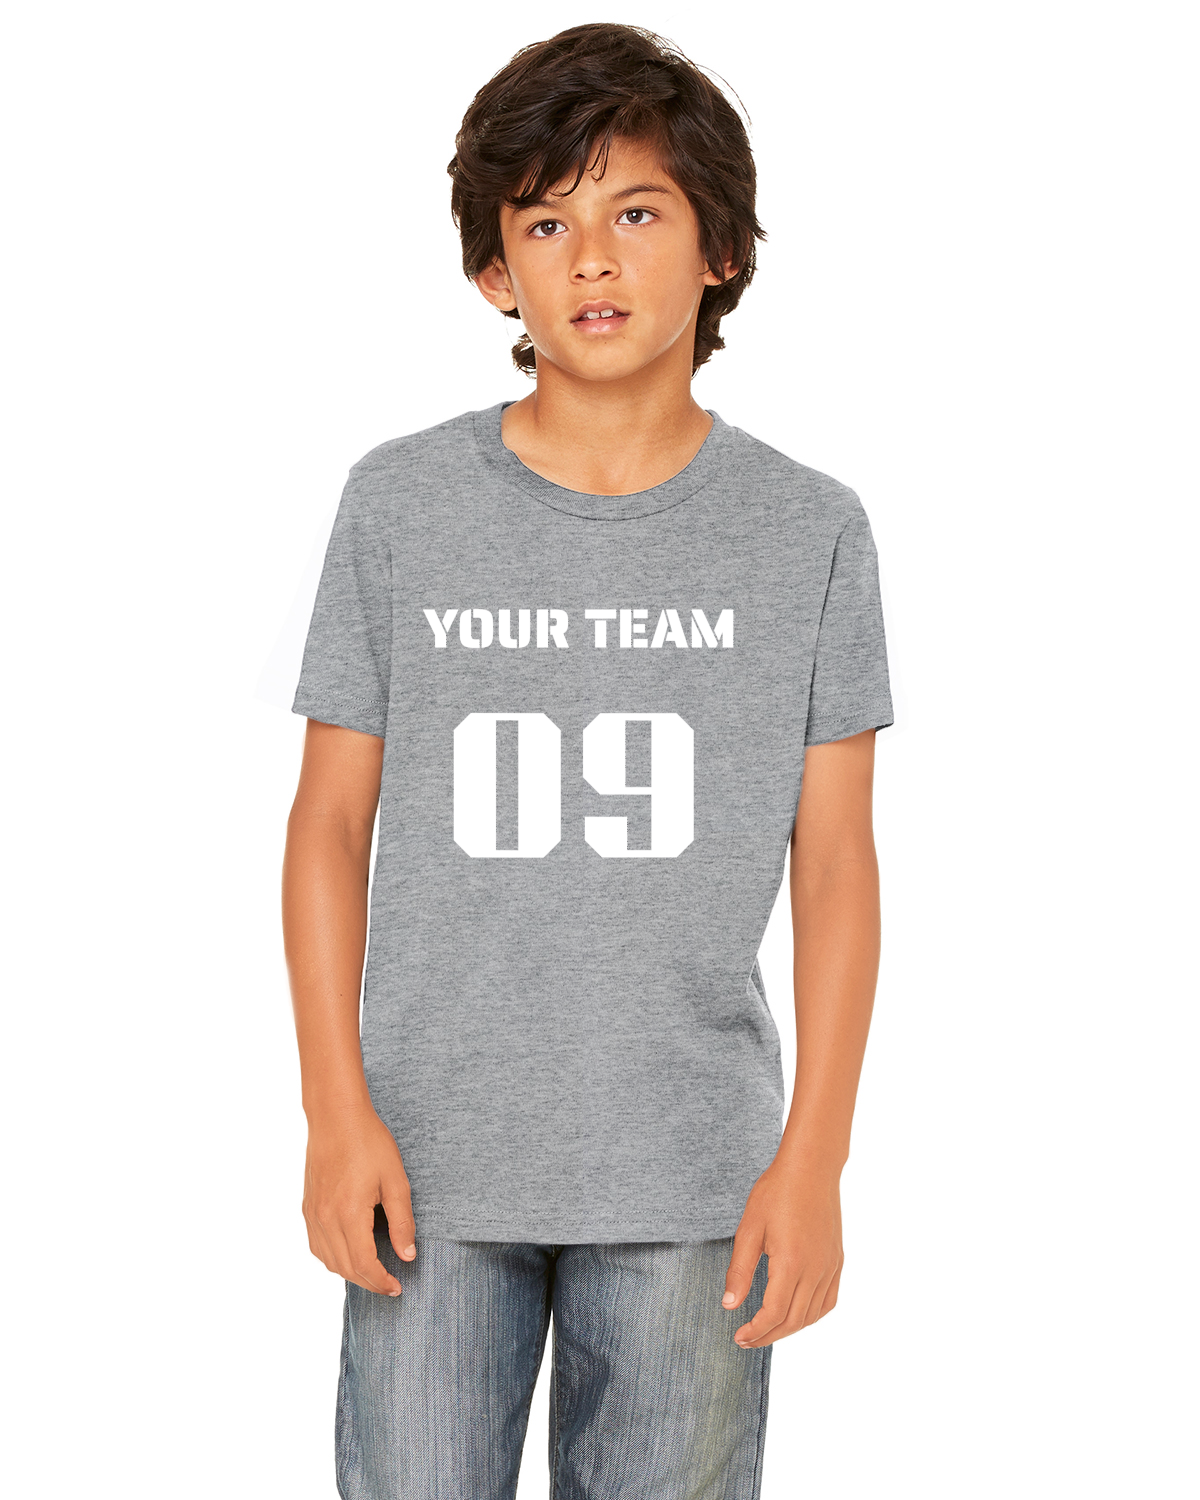 Youth Personalized Jersey Tee